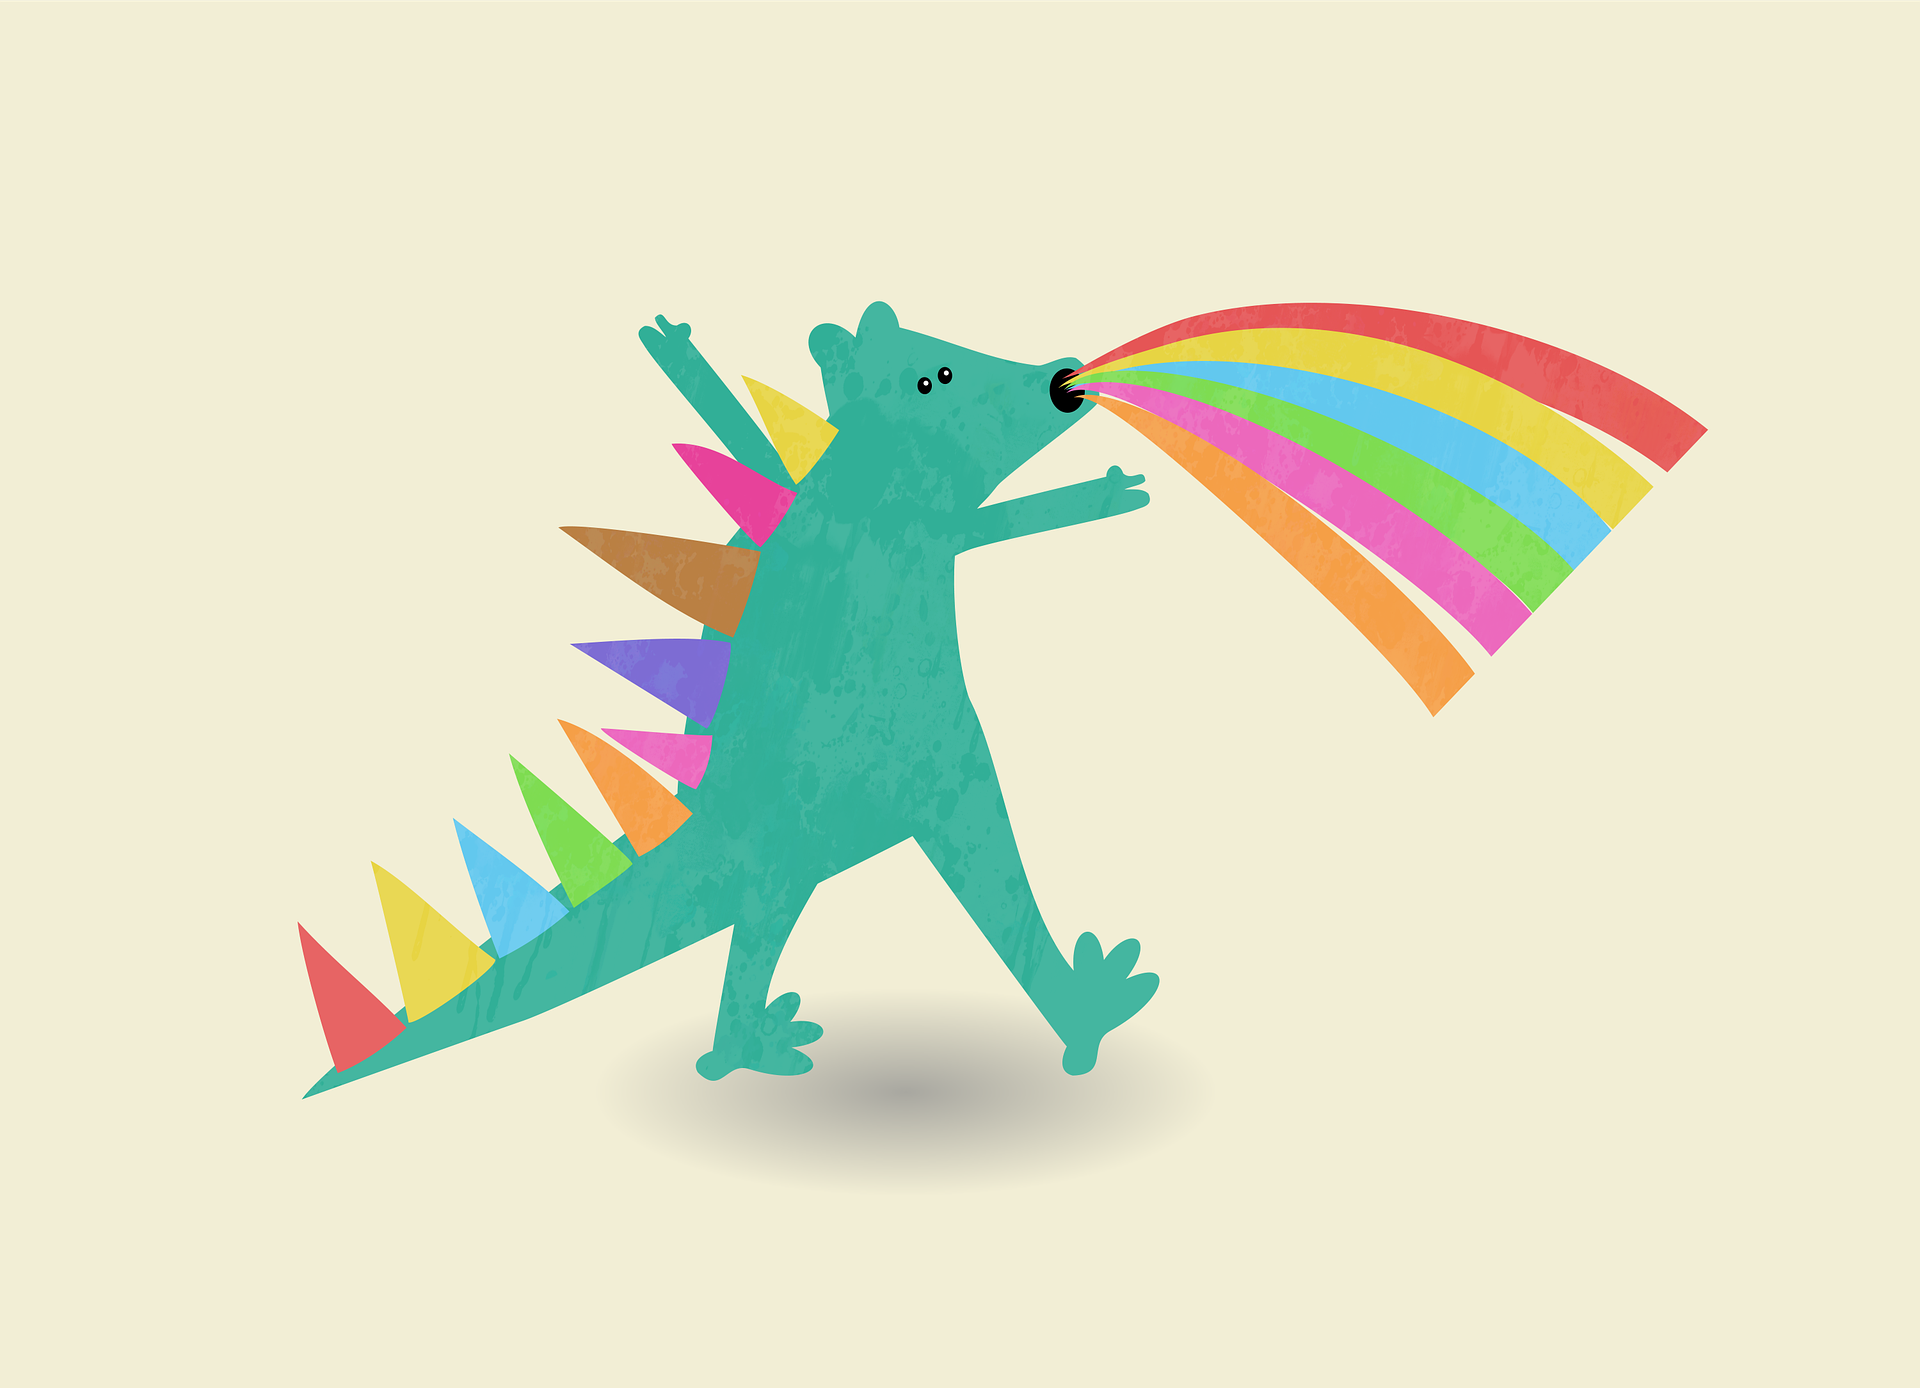 cute and colorful dinosaur